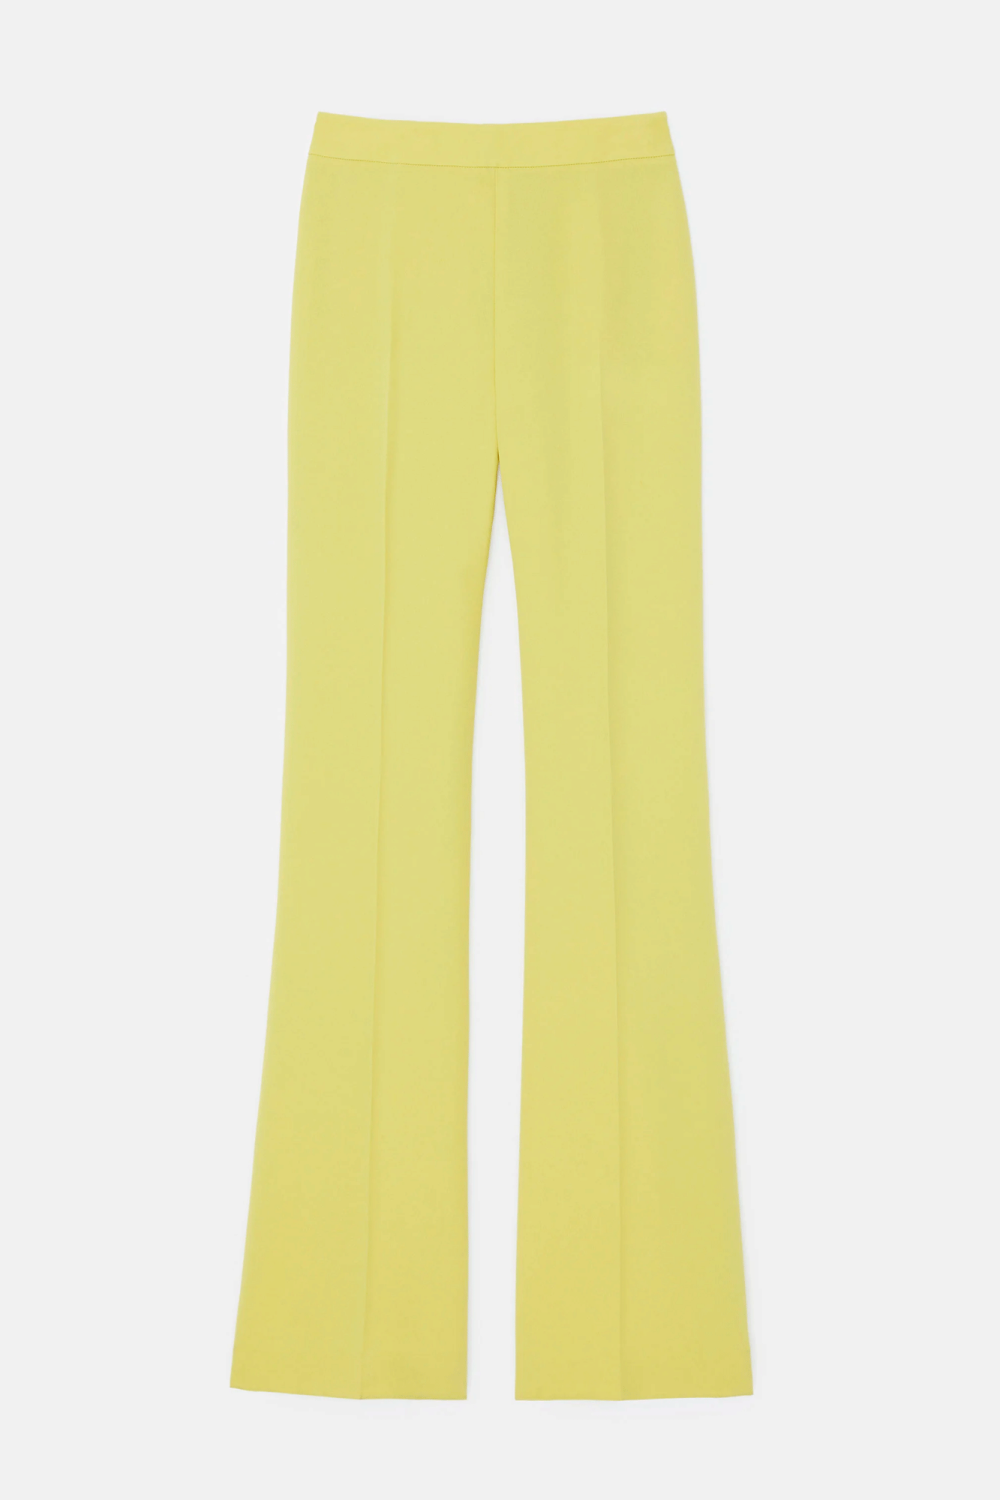 Be fashion-forward with the Gates Side Zip Flare Pant from Lafayette 148. Crafted from House Finesse Crepe fabric, this pant features an elongated length, high rise silhouette and a clean side zip. 